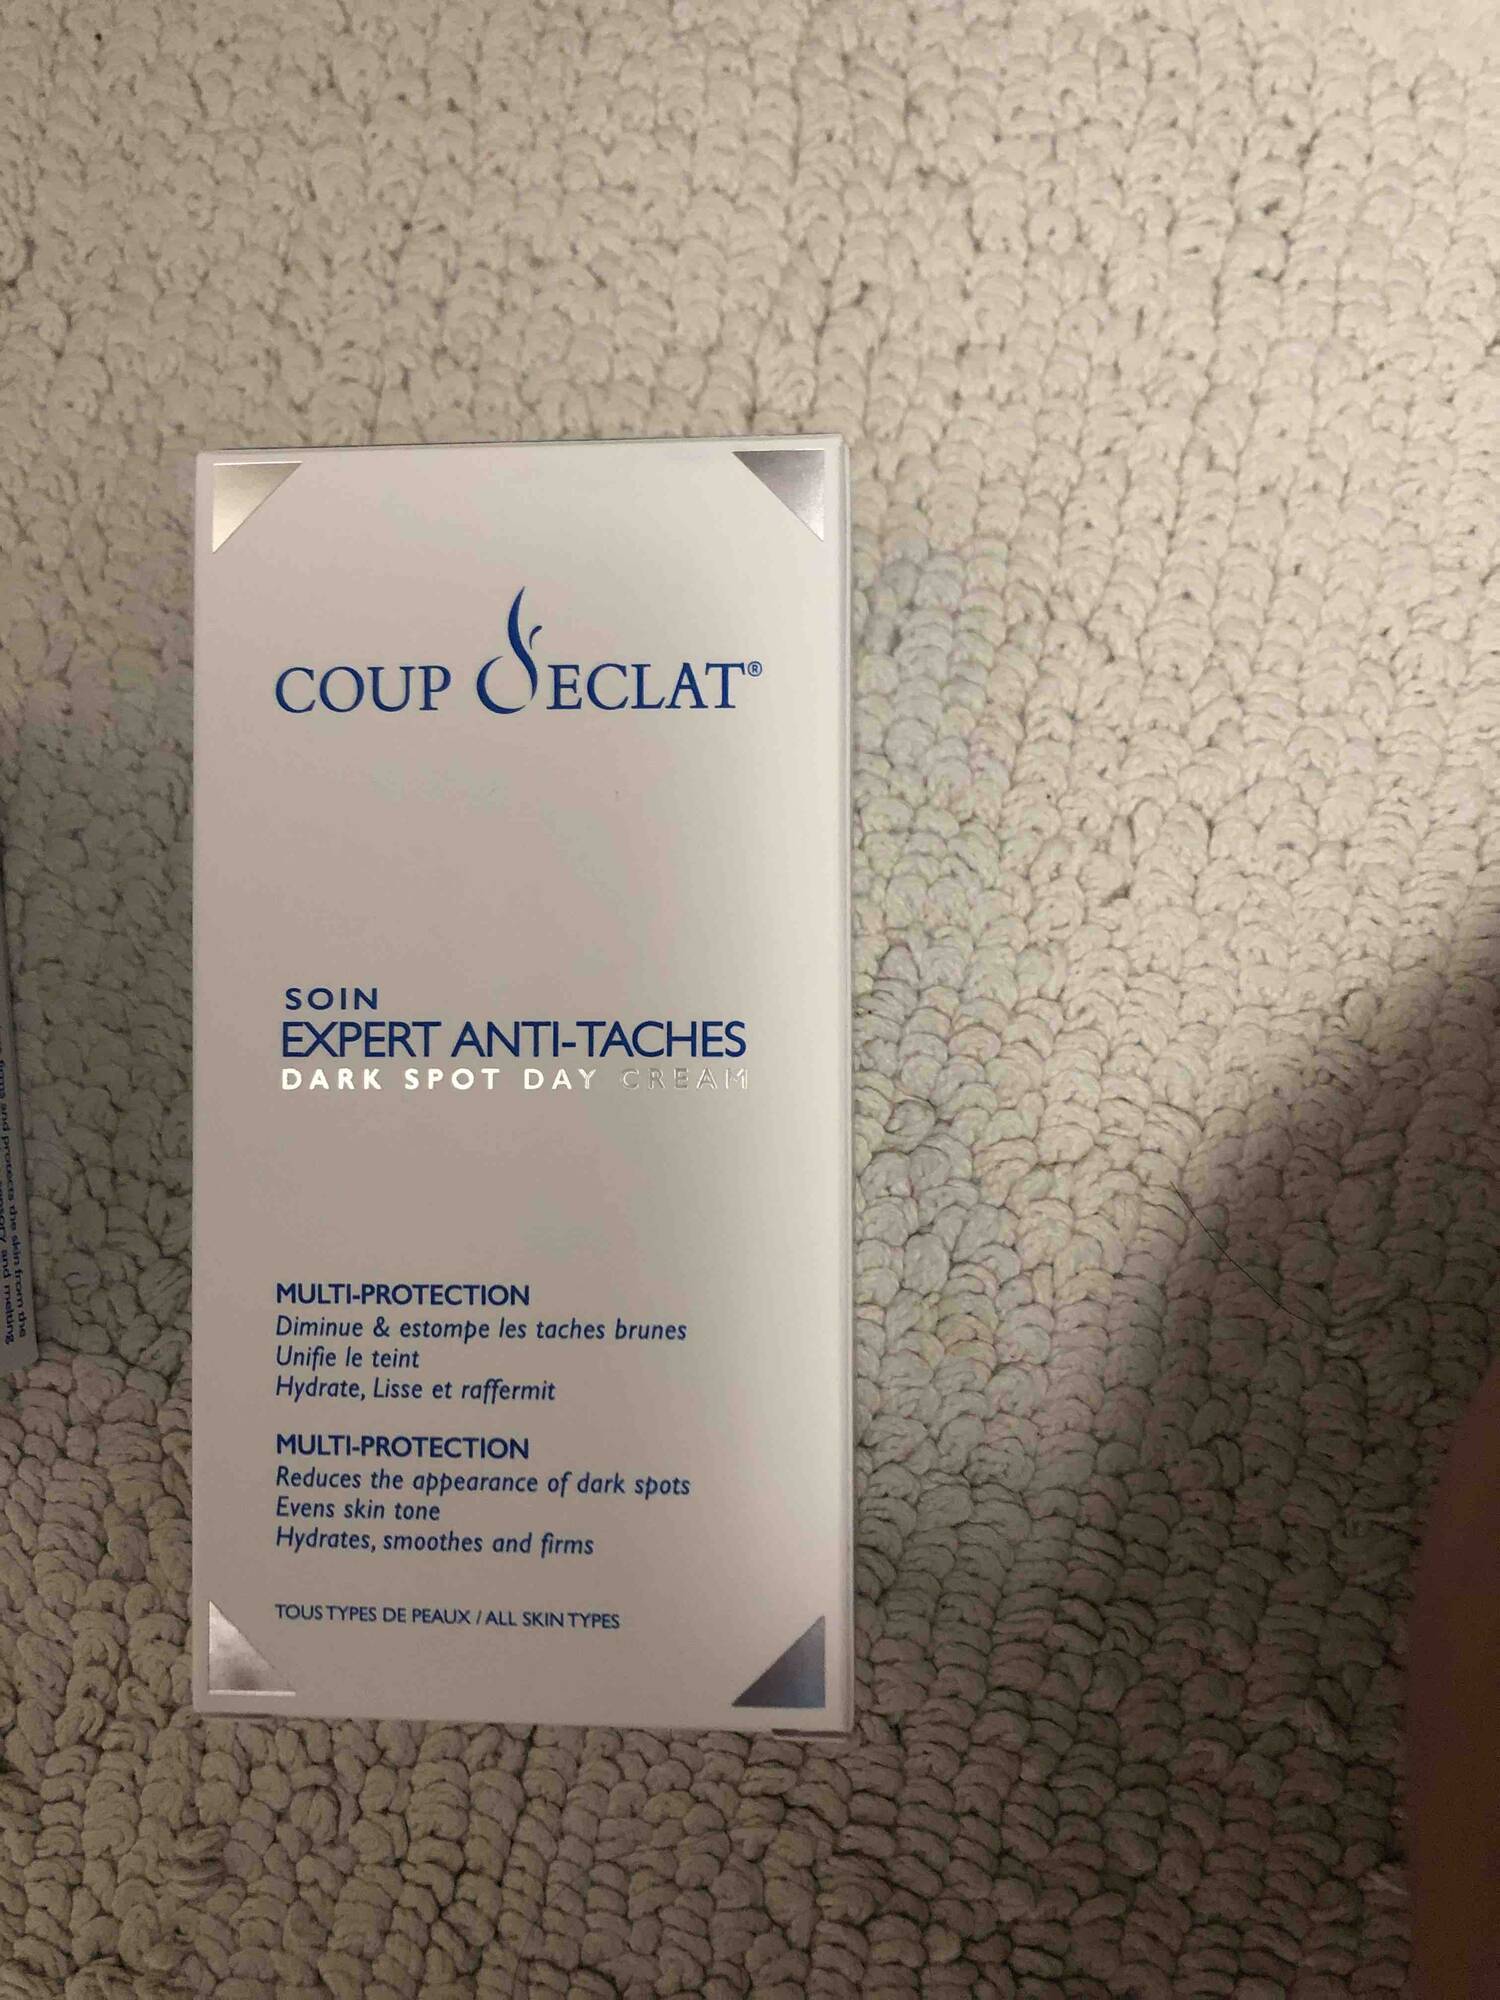 COUP D'ECLAT - Soin expert anti-taches multi-protection